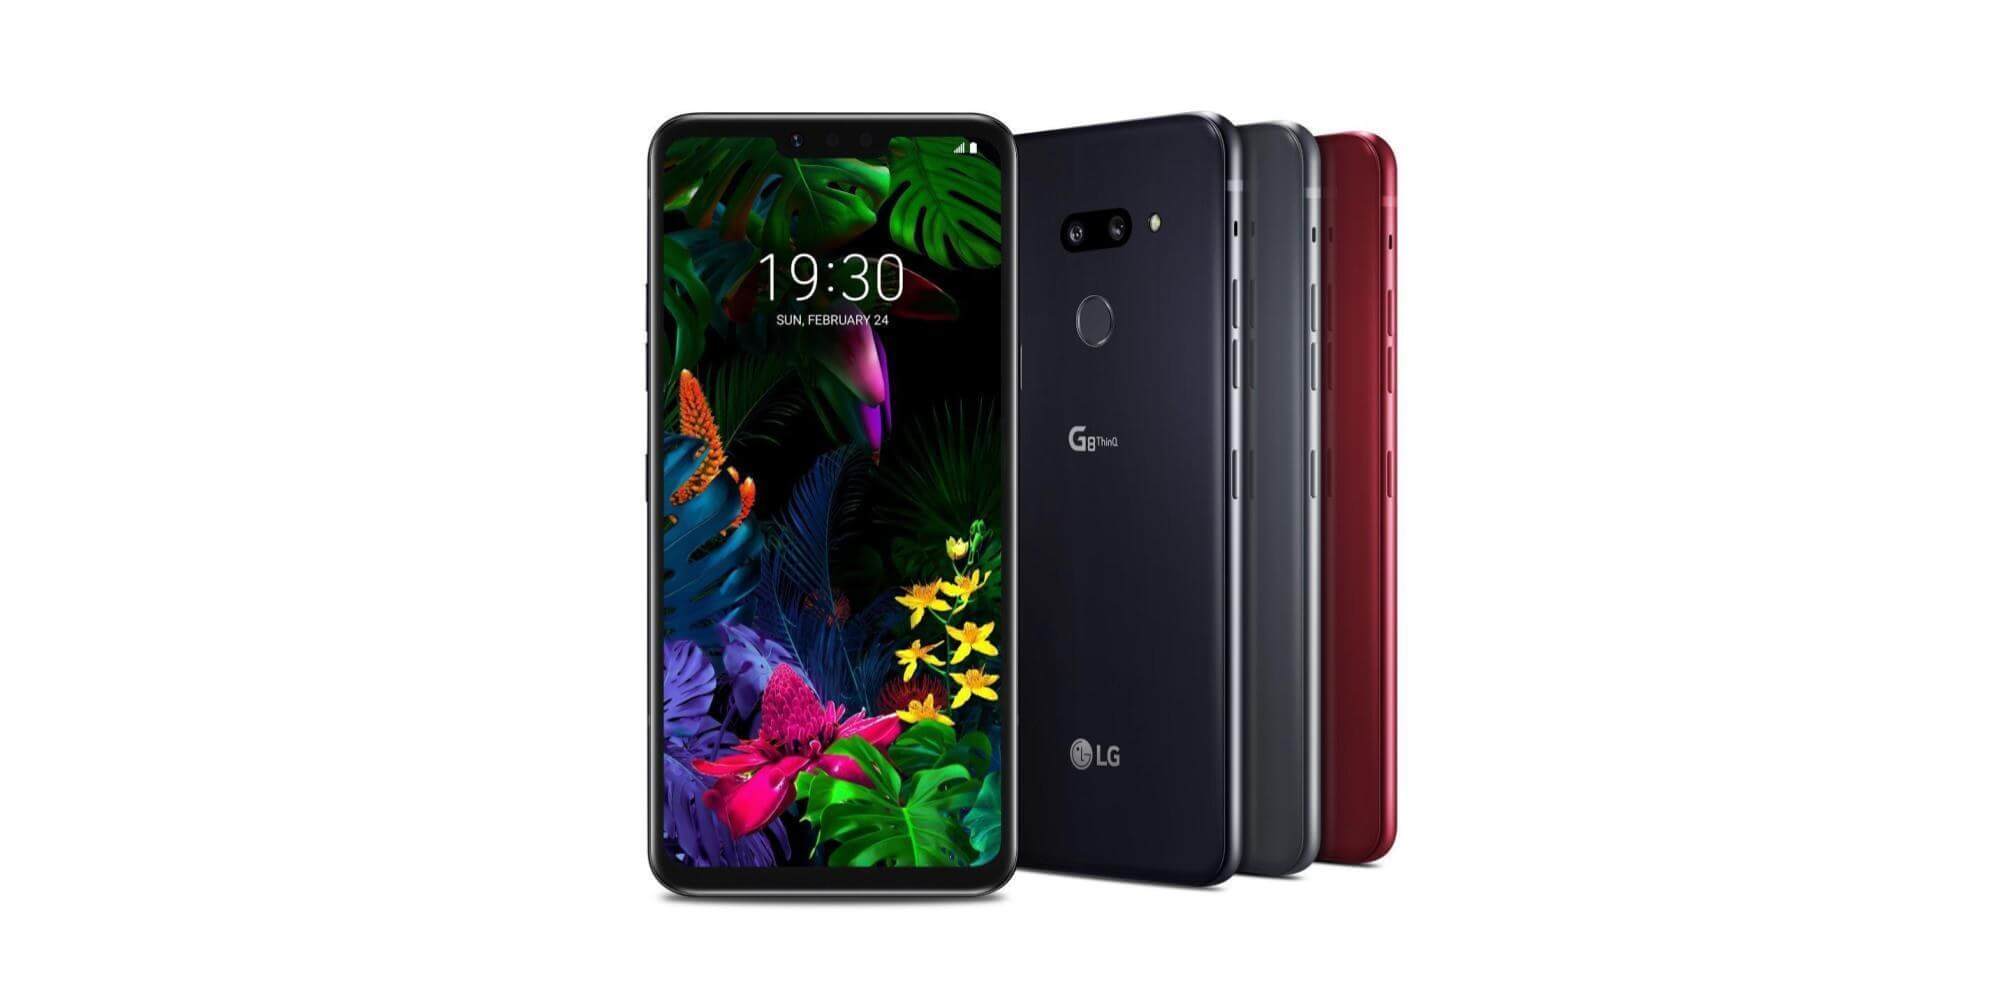 LG announces the G8 ThinQ and V50 ThinQ, featuring Hand ID, 5G 